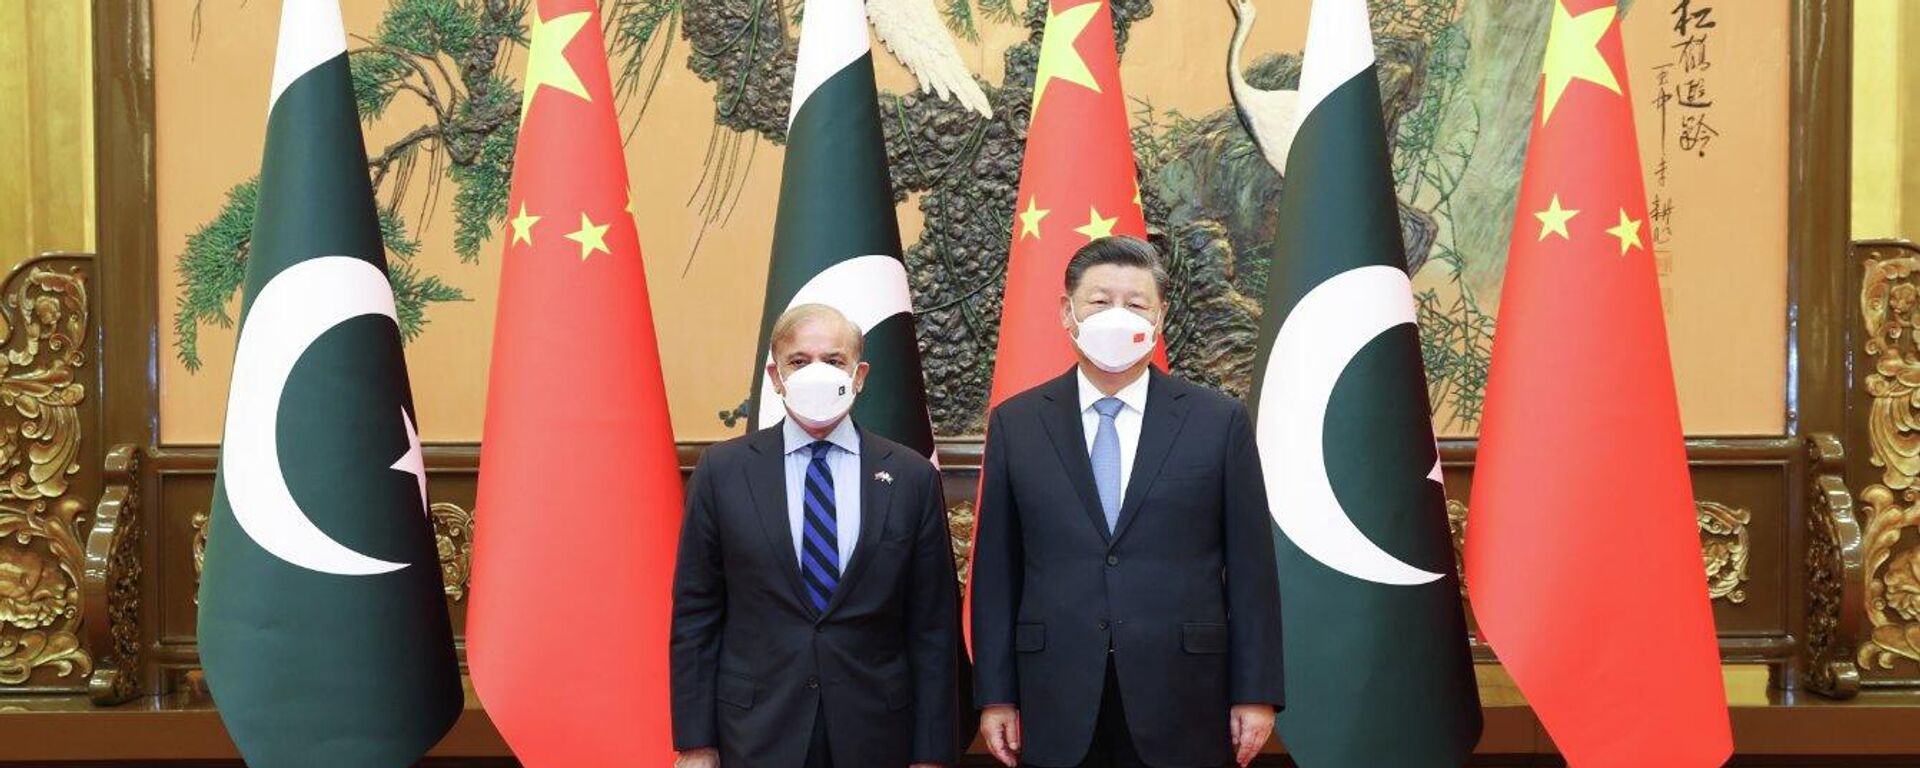 President Xi Jinping had a very good meeting with Prime Minister Shehbaz Sharif of Pakistan on his official visit to China, Beijing says. - Sputnik International, 1920, 03.11.2022